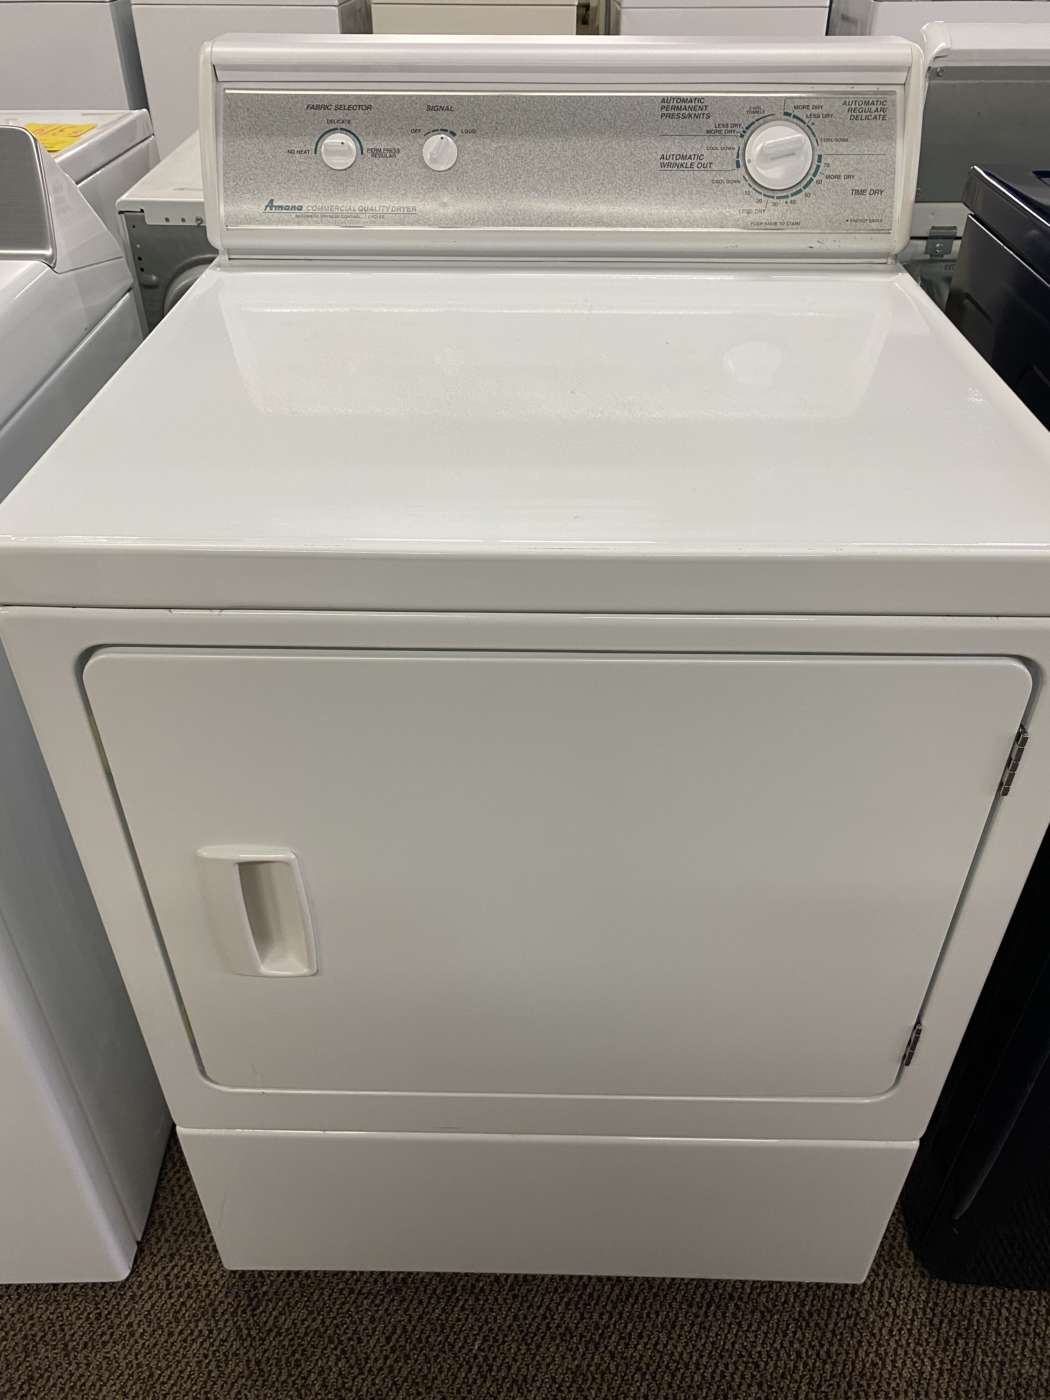 Reconditioned AMANA 7.1 Cu. Ft. Electric Dryer – White